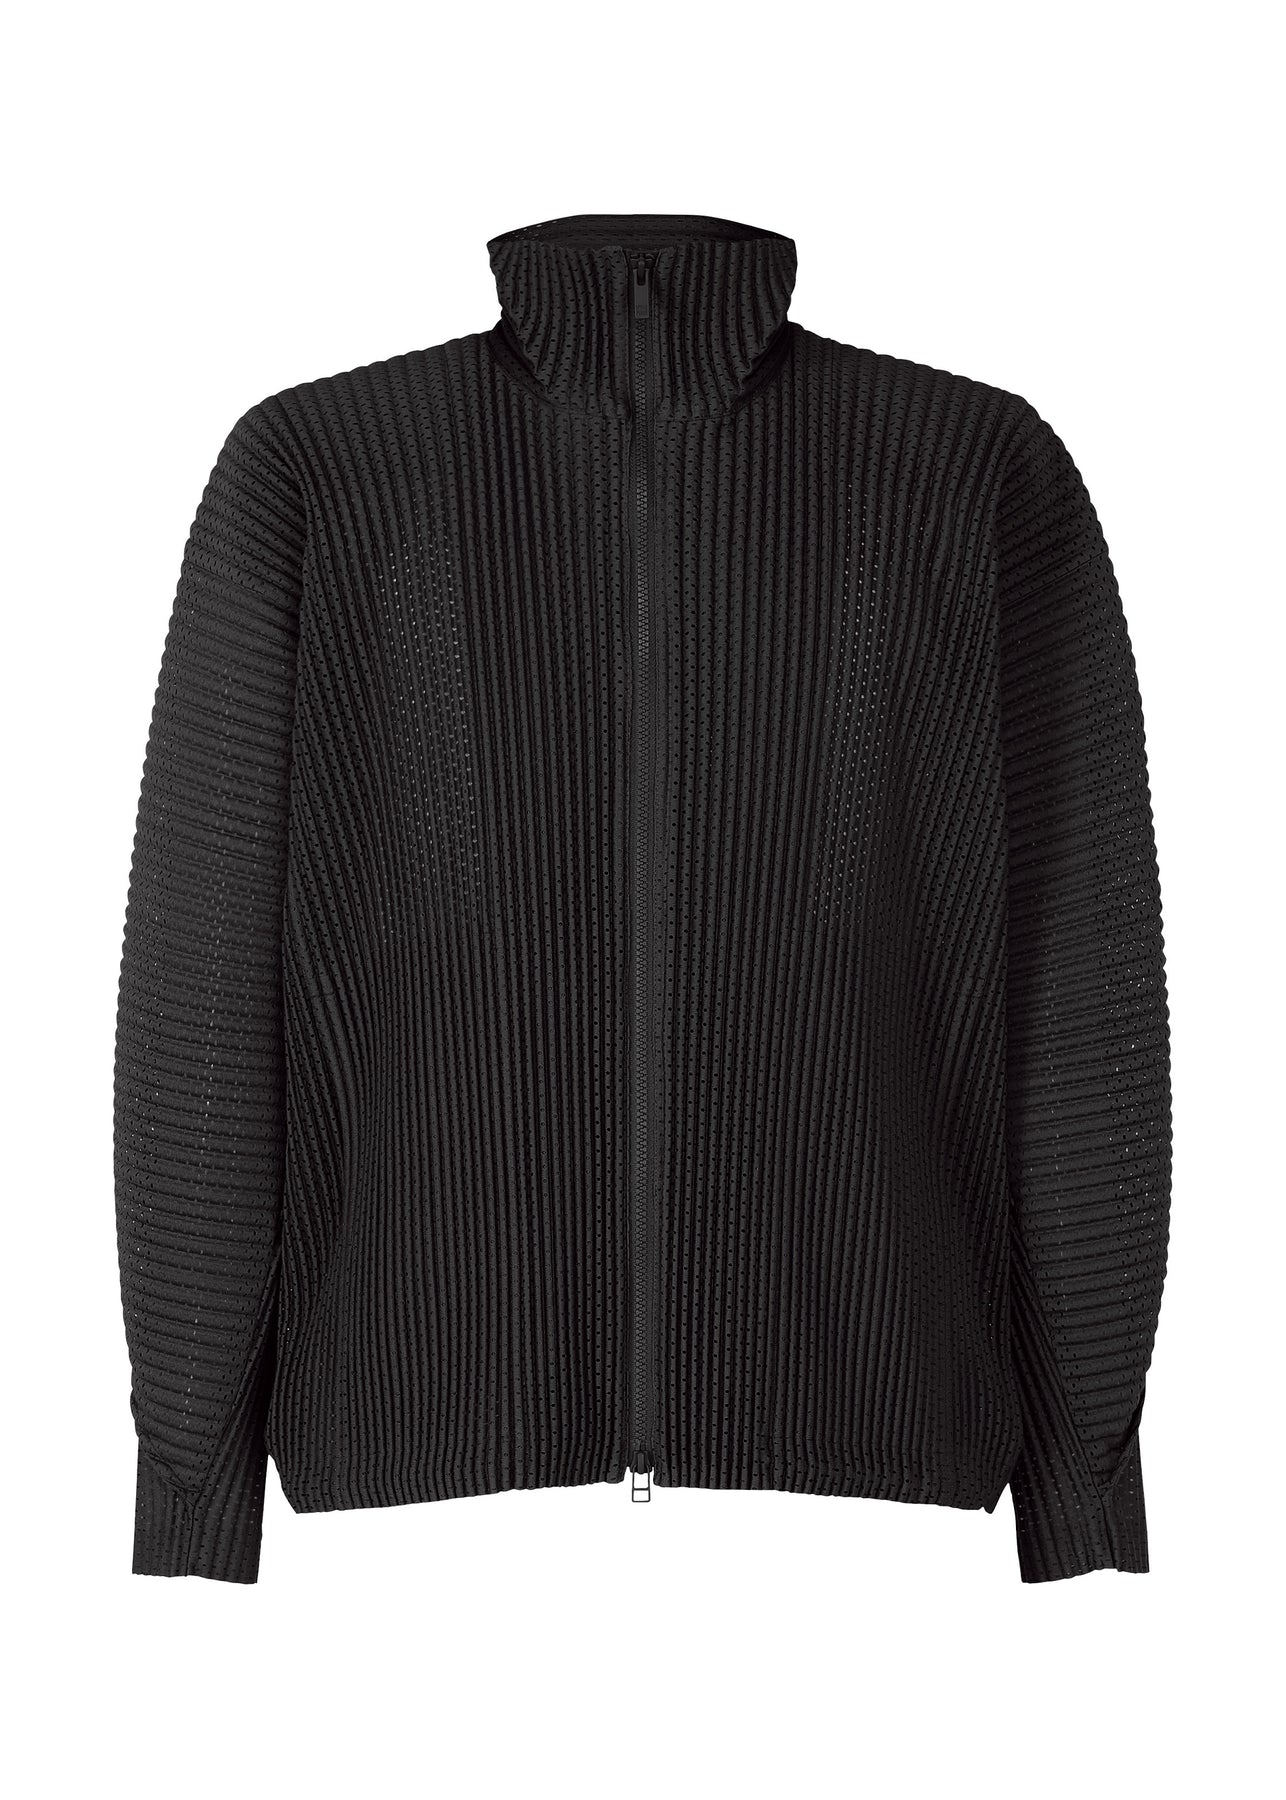 OUTER MESH JACKET | The official ISSEY MIYAKE ONLINE STORE | ISSEY